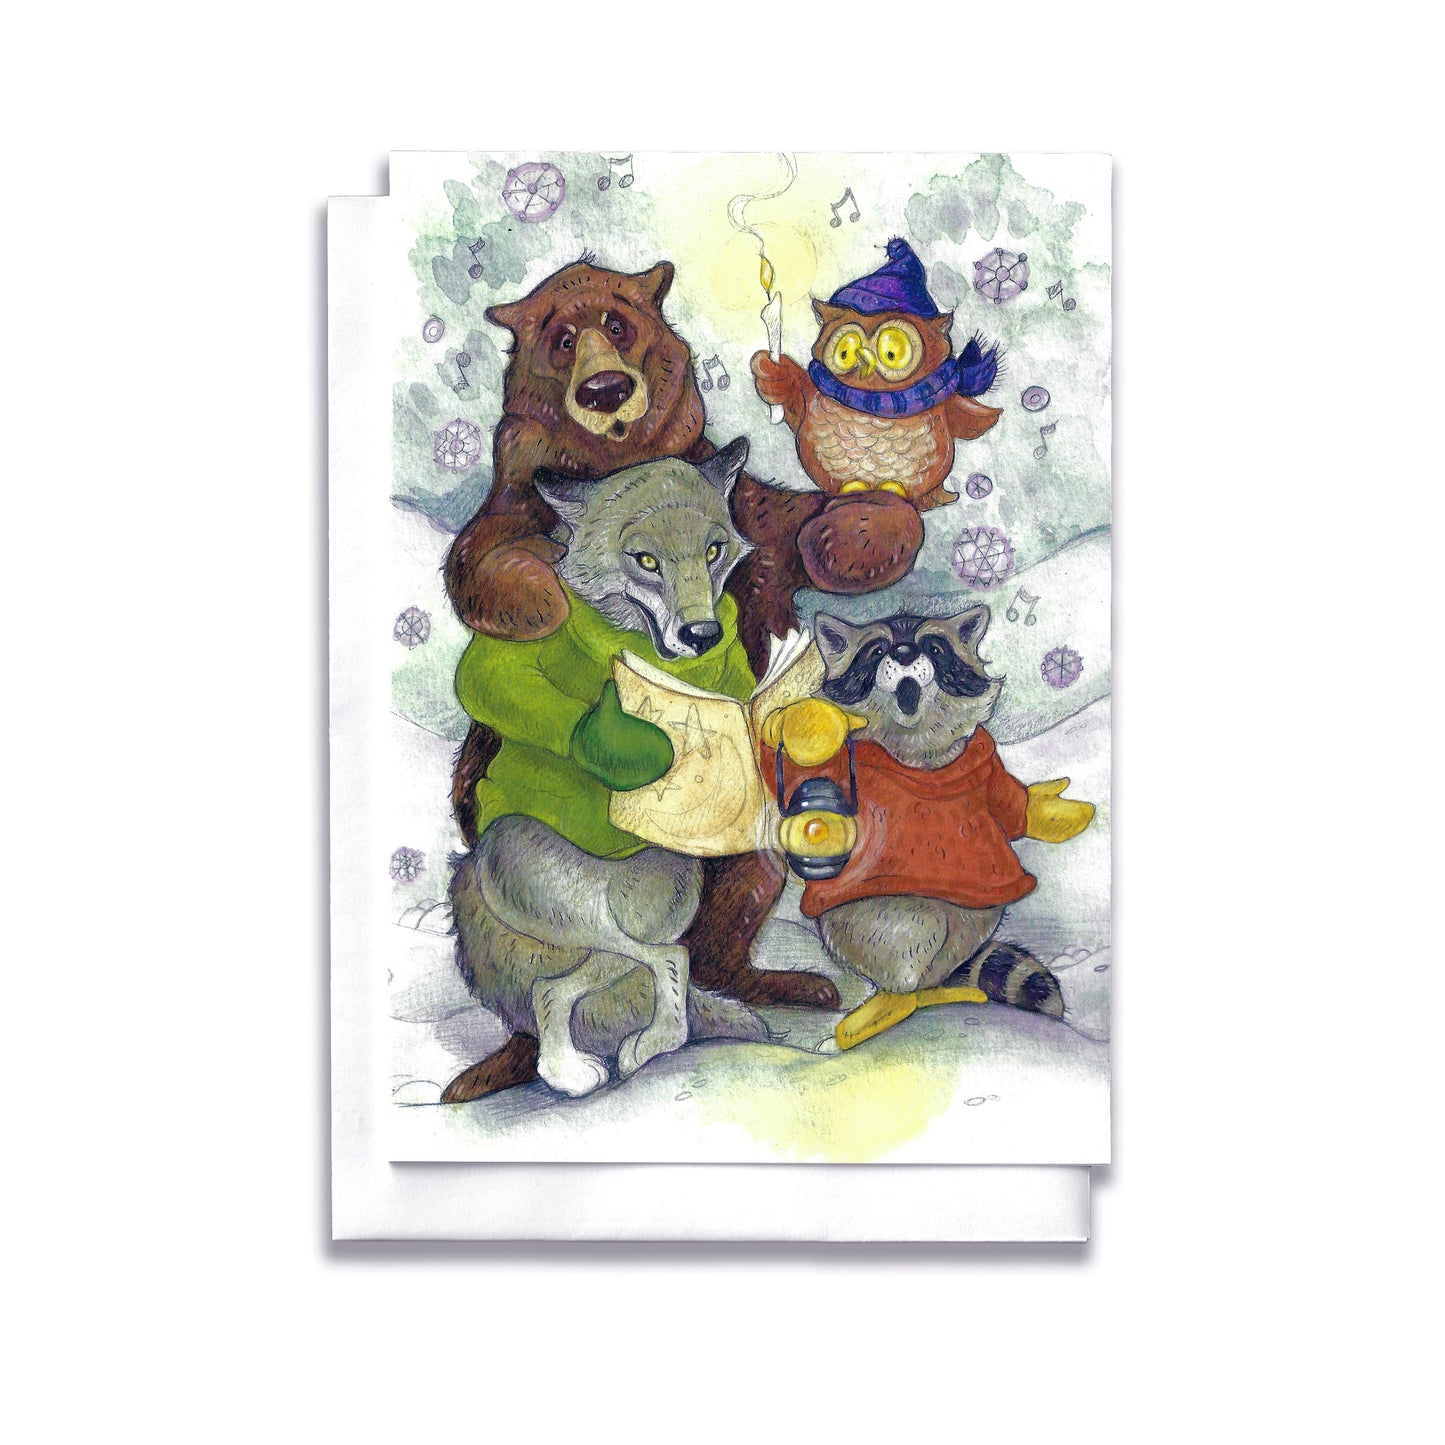 An illustrated christmas card of a bear, wolf, raccoon and owl together singing Christmas Carols in the forest.